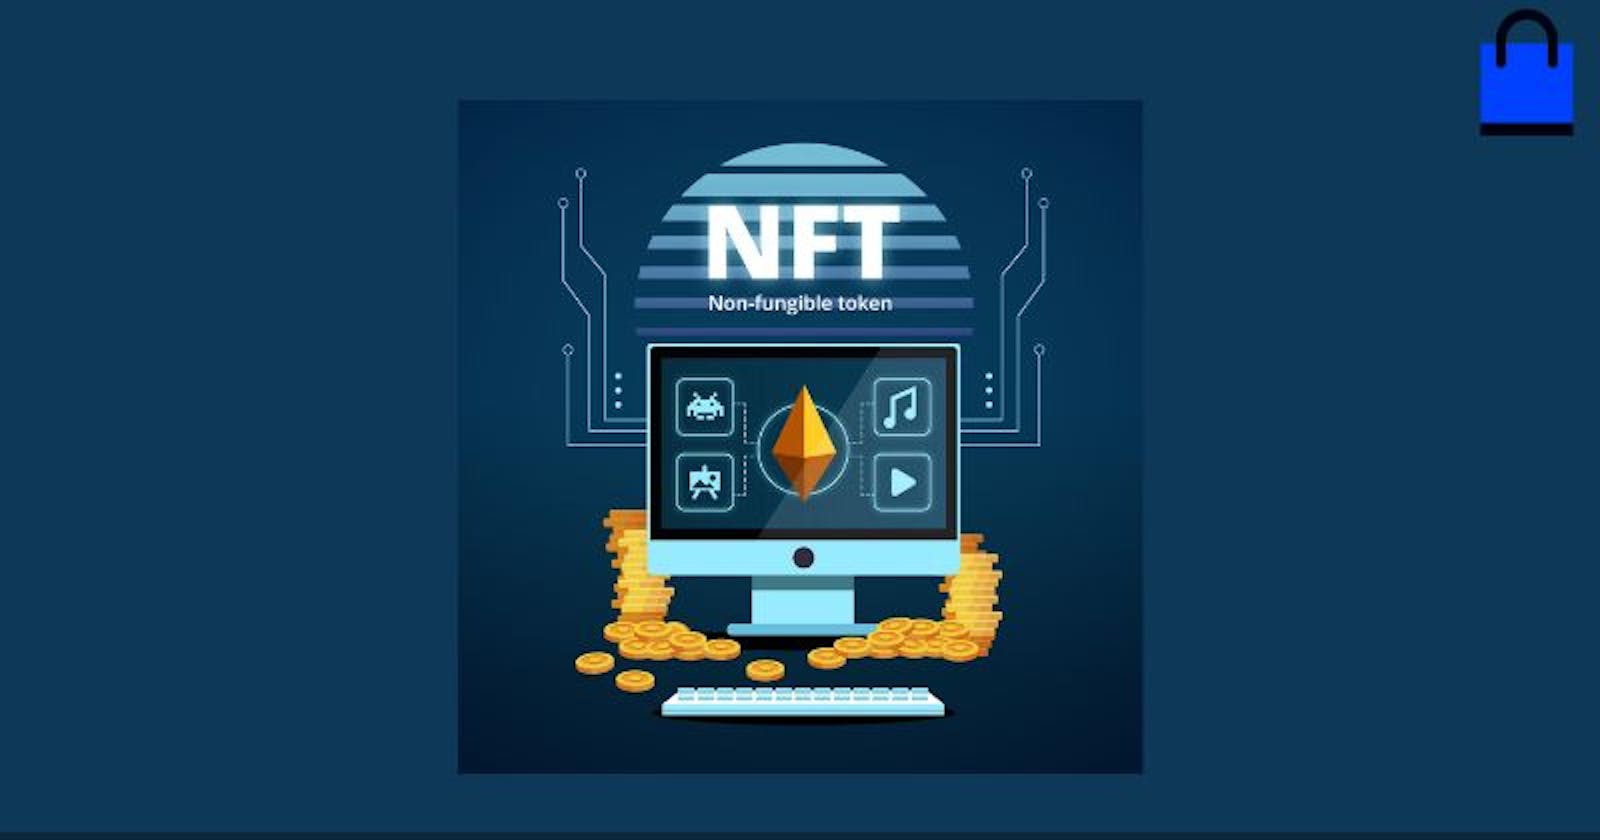 What is the Functionality of NFT Marketplace?